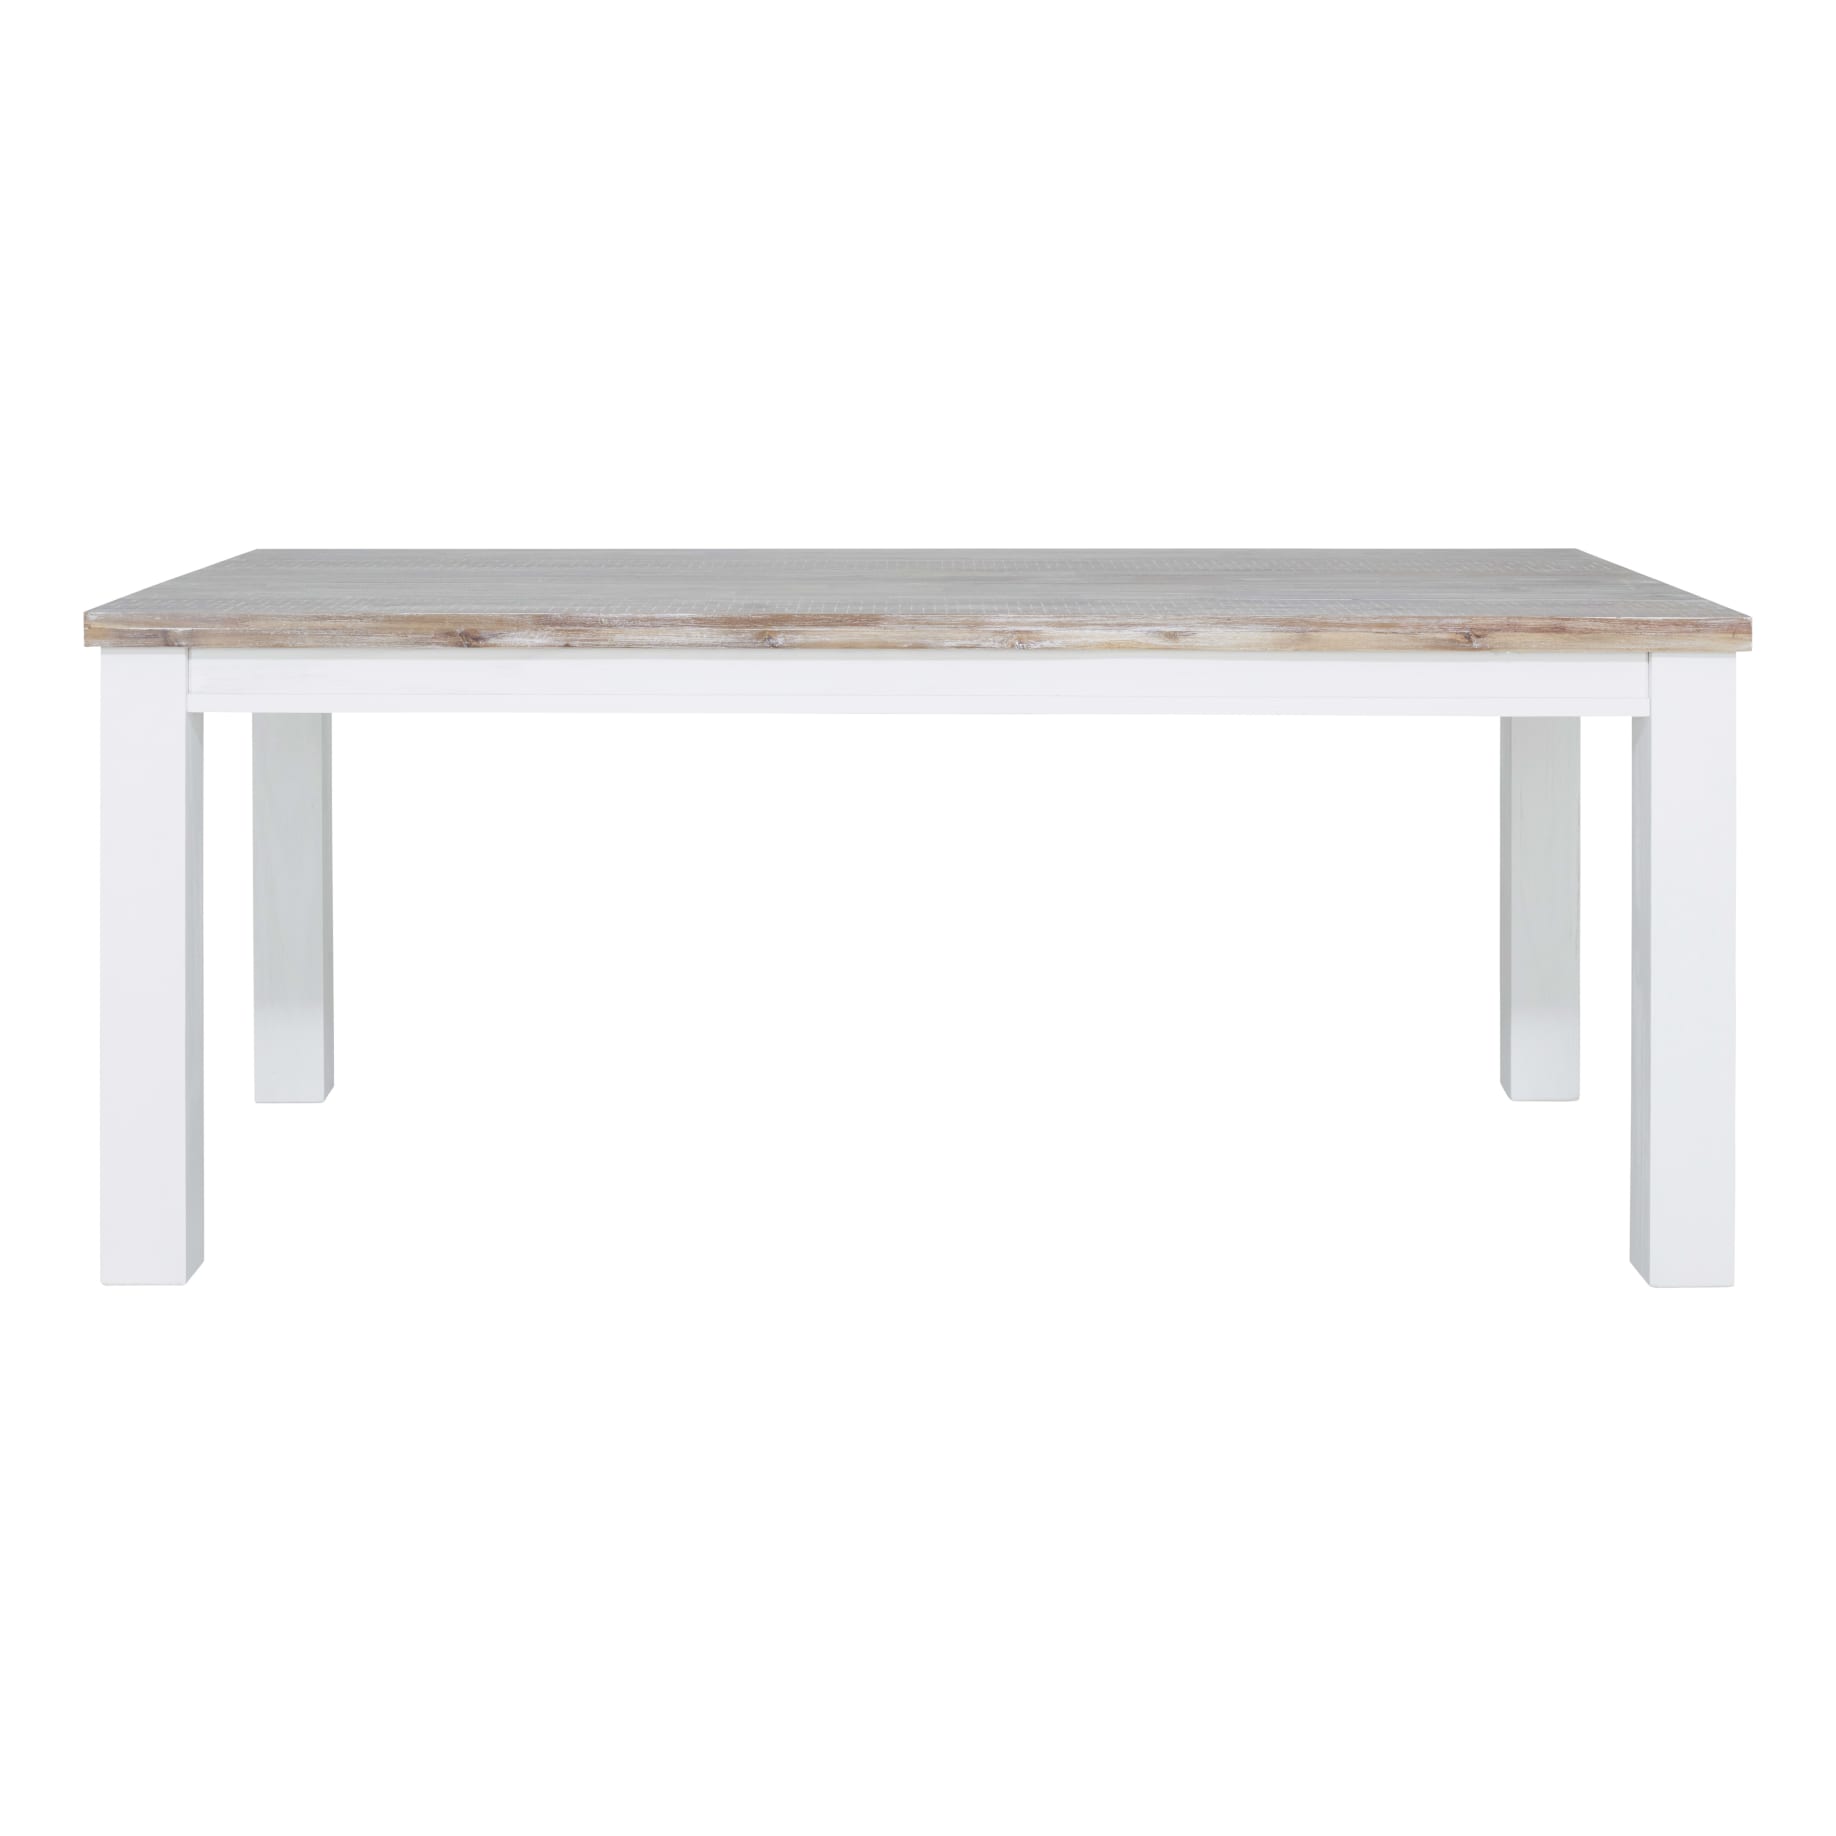 Halifax Dining Table 225cm in Acacia Grey / White